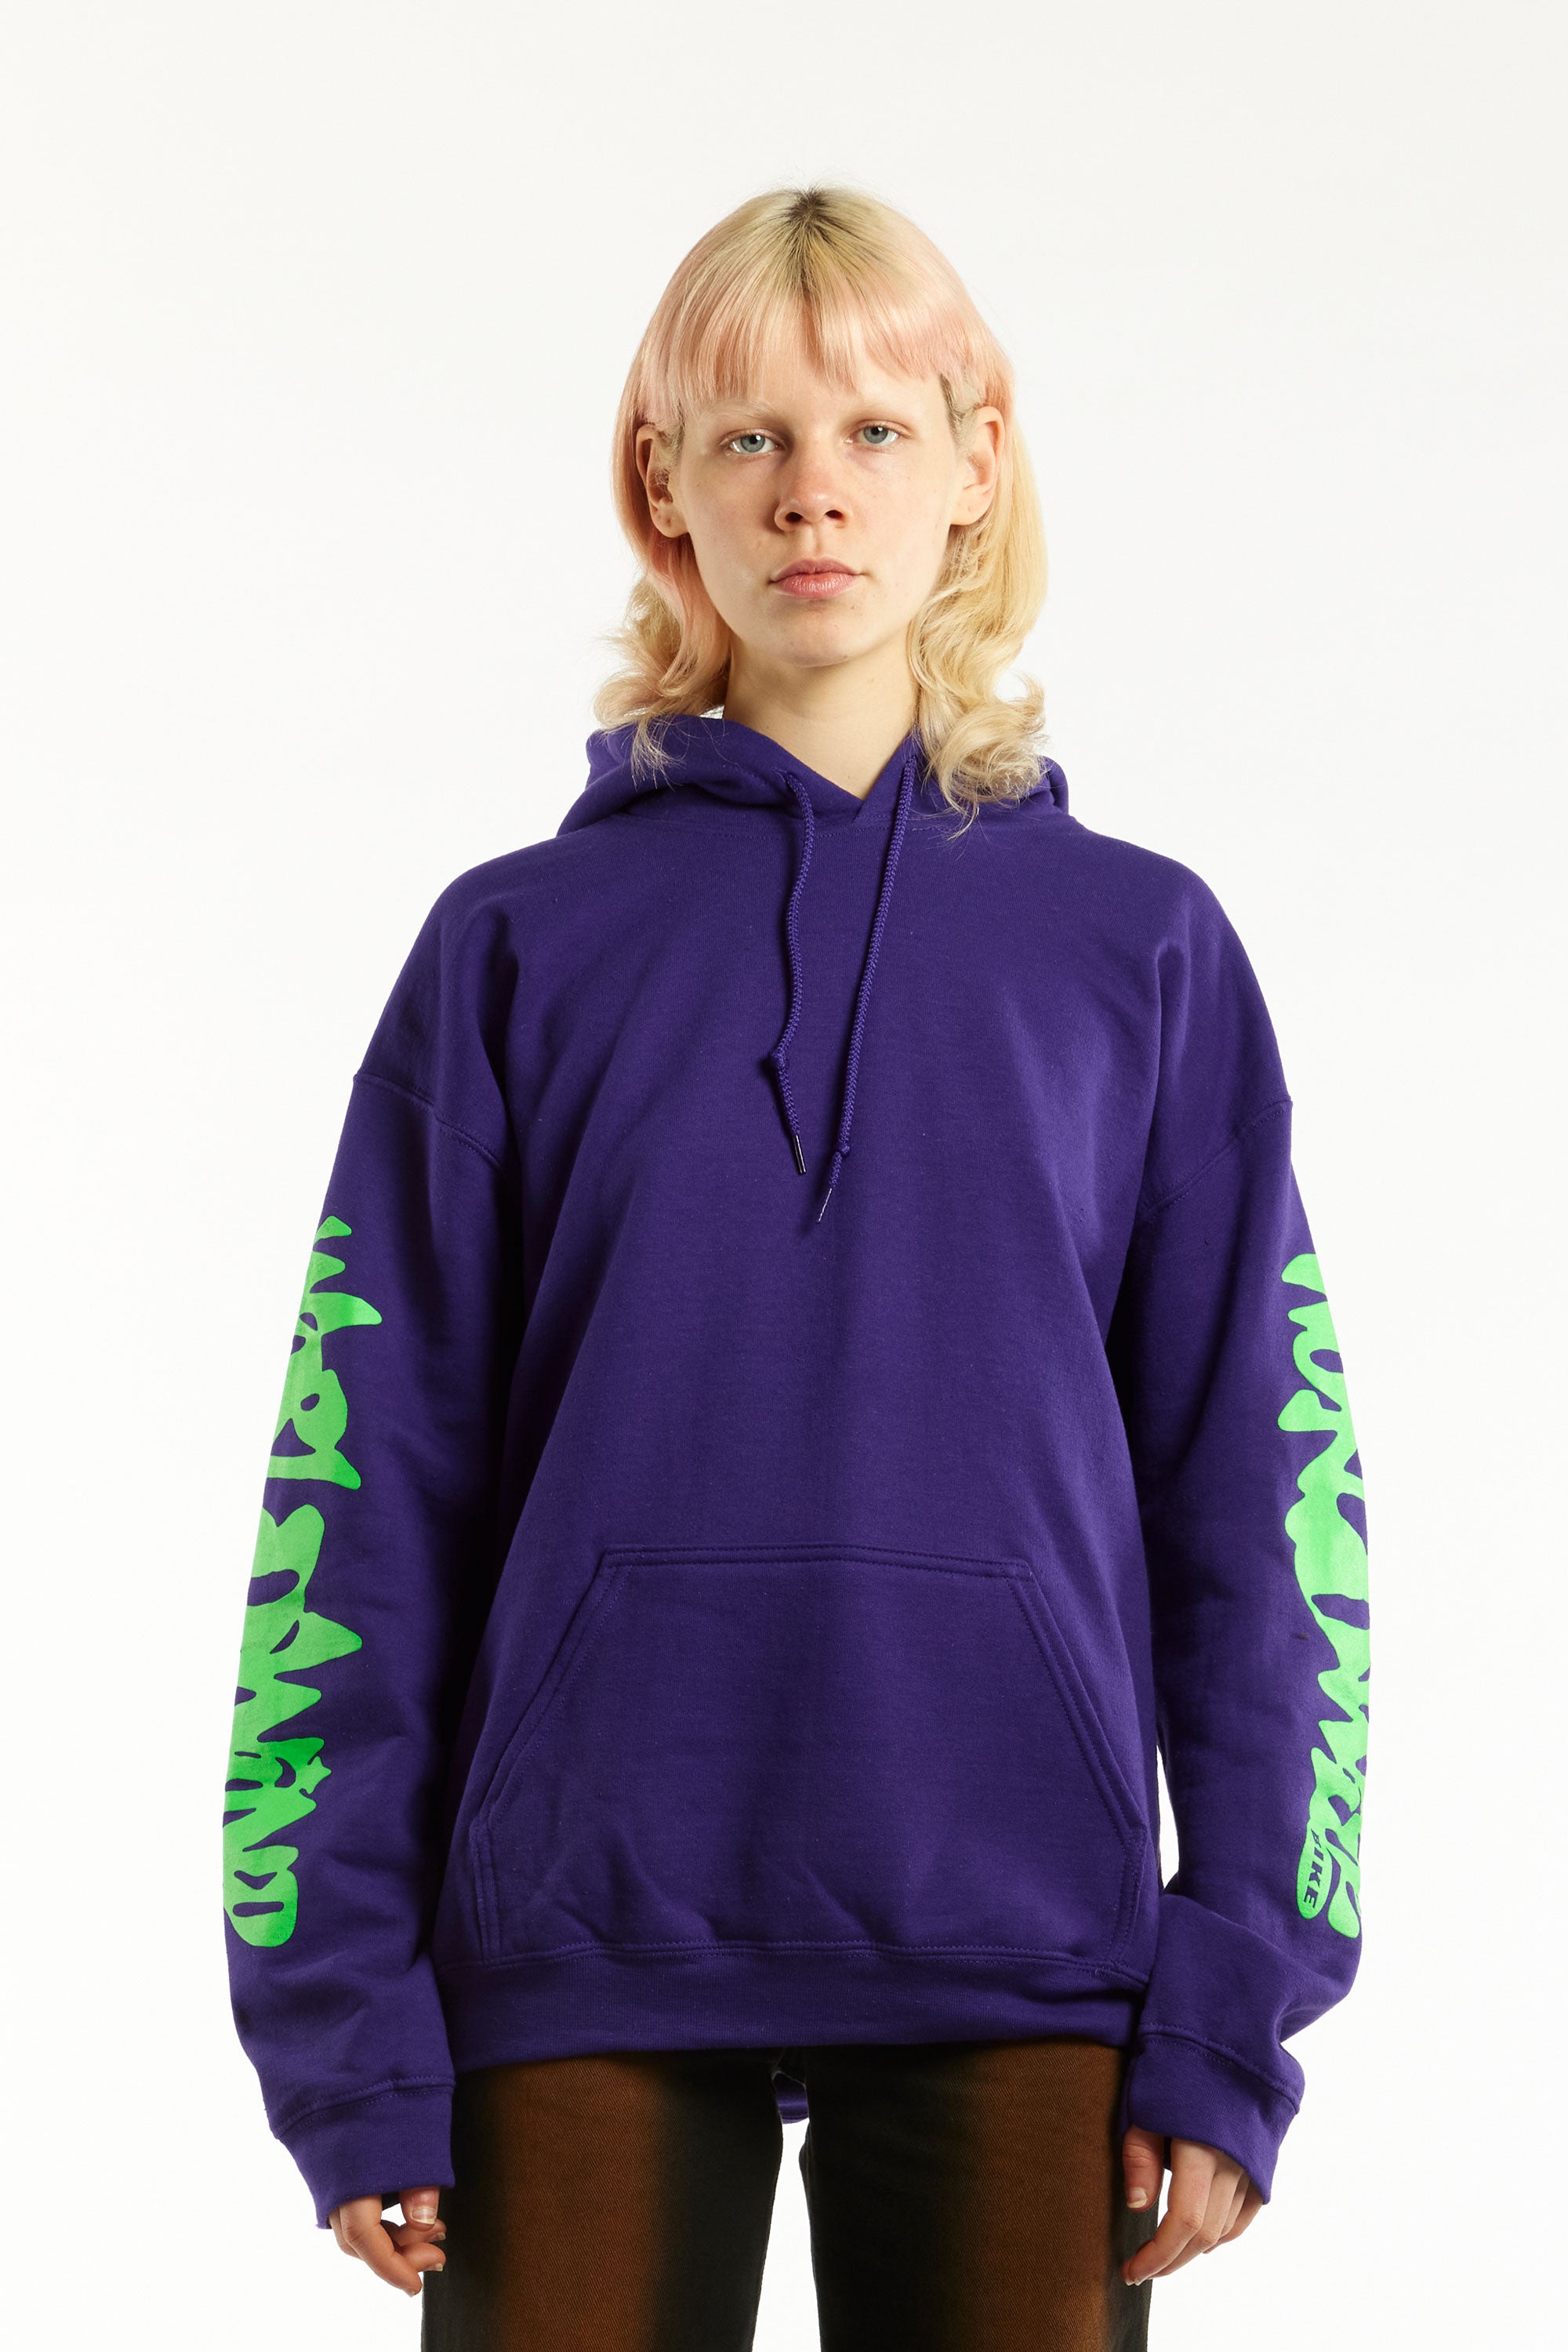 The WORLDWIND - CROAKY WHEEL HOODIE PURPLE available online with global shipping, and in PAM Stores Melbourne and Sydney.